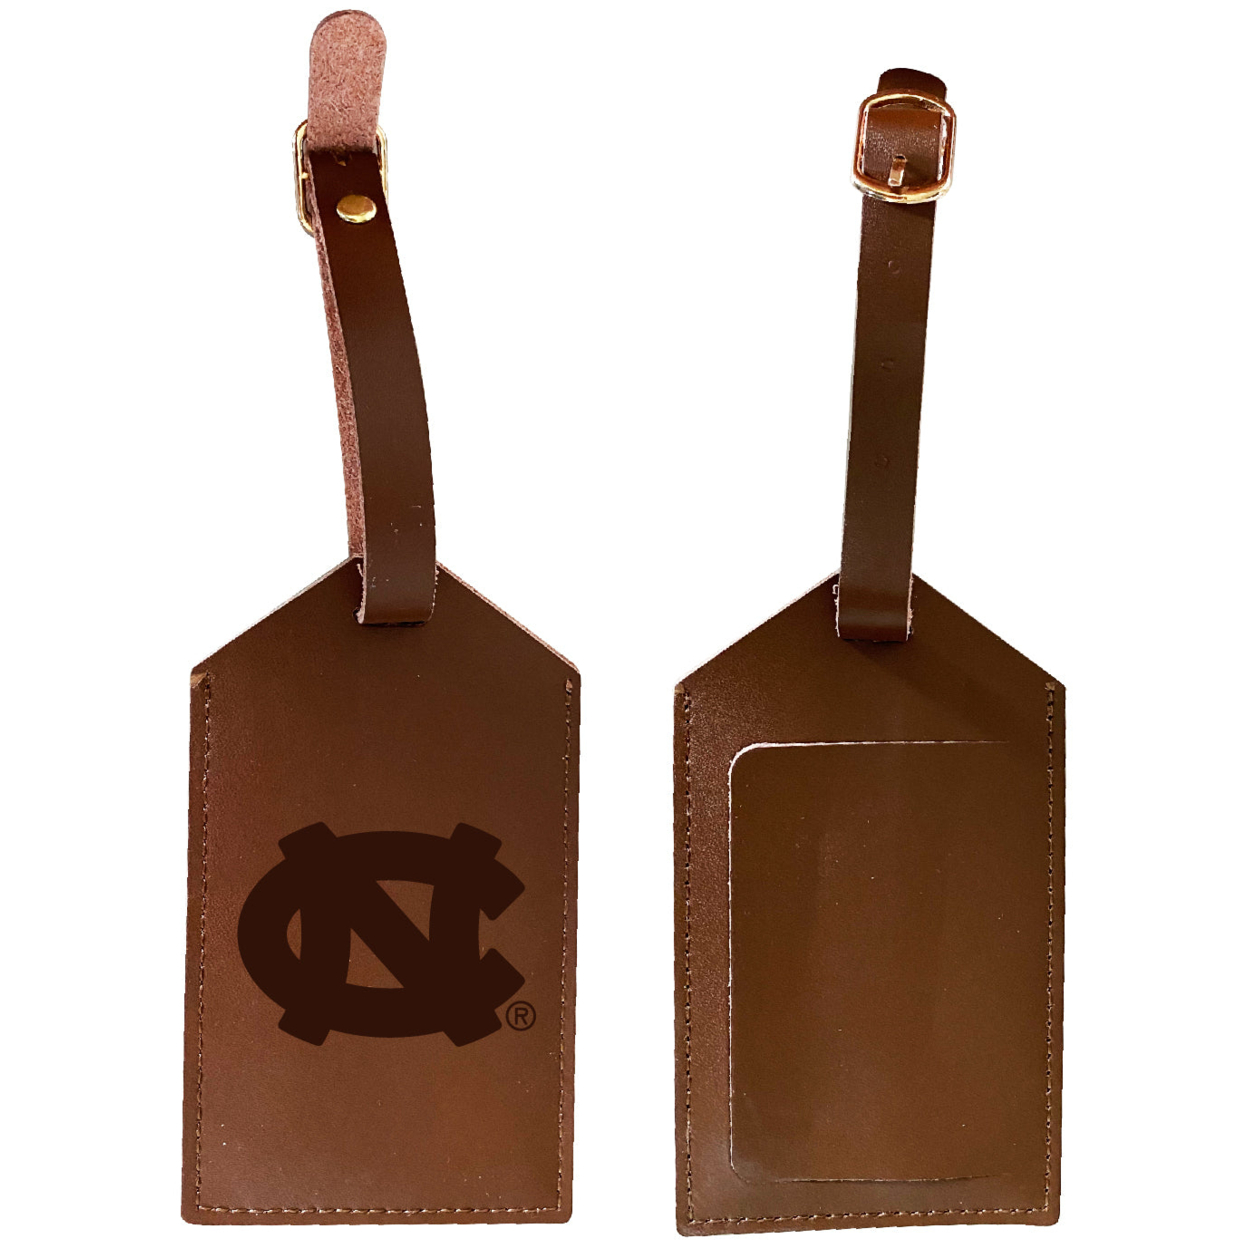 UNC Tar Heels Leather Luggage Tag Engraved